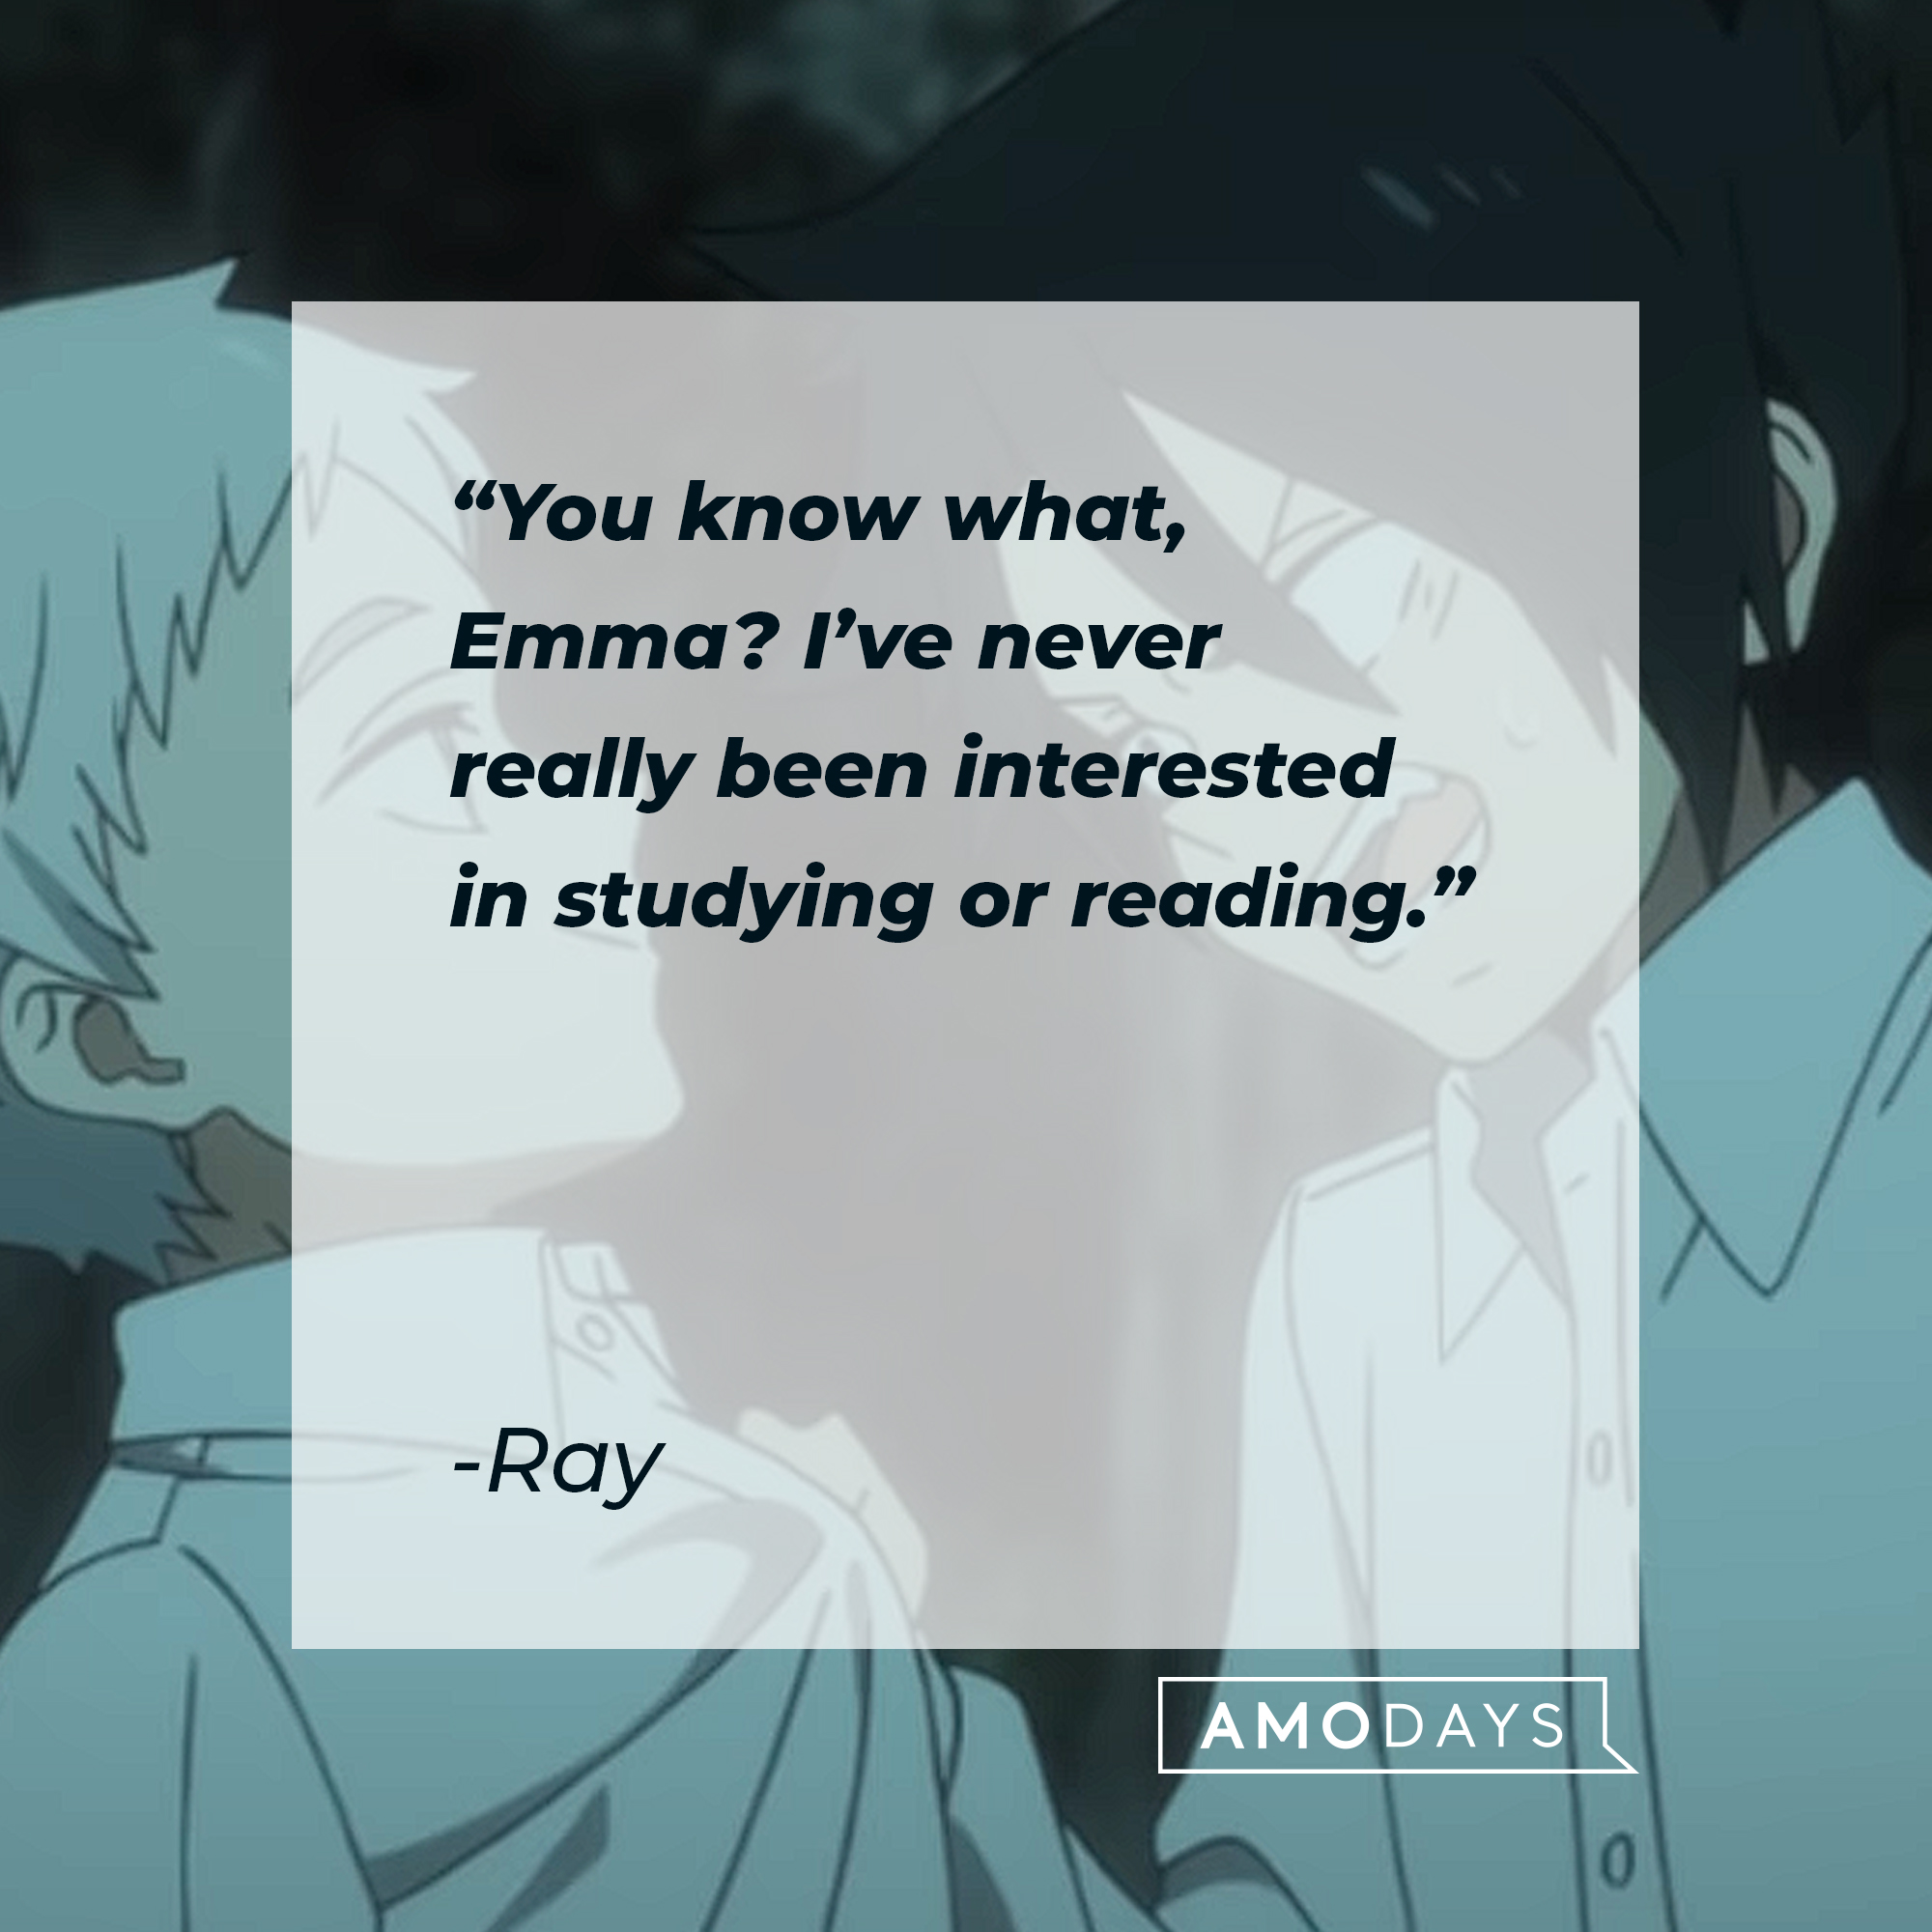 You know what, Emma? I've never really been interested in studying or reading.